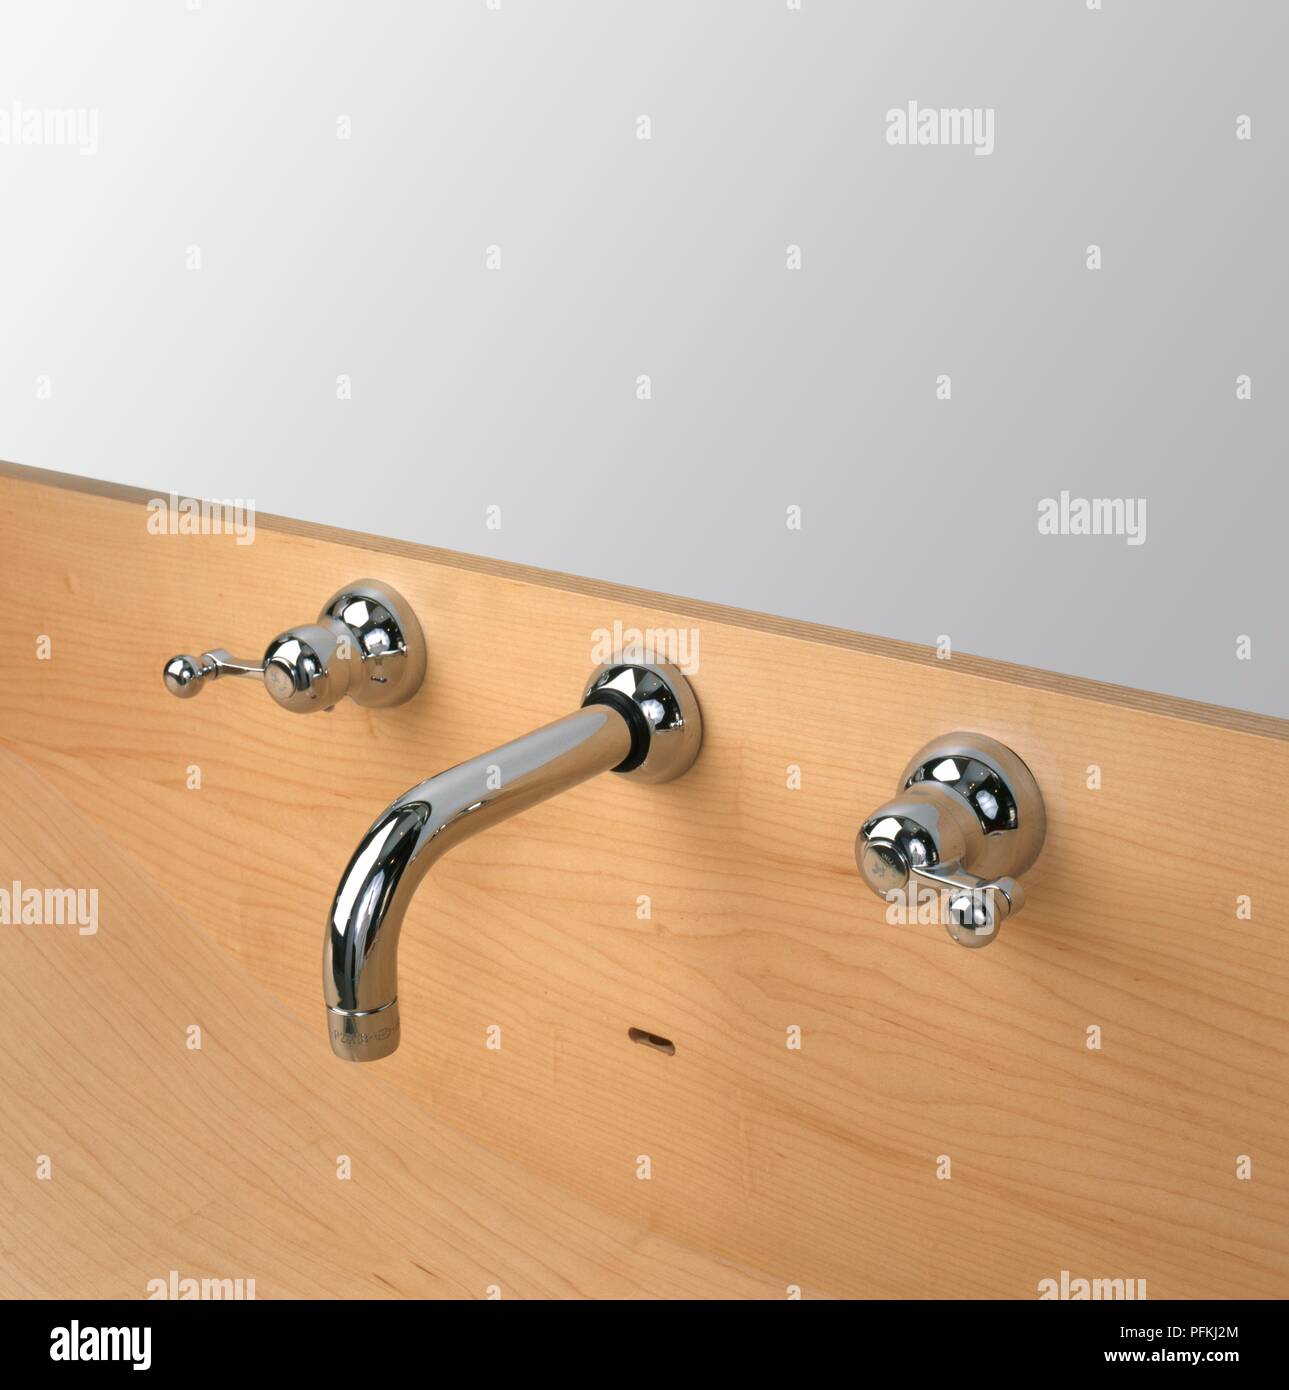 Bathroom tap fittings set in wooden surface, close-up Stock Photo